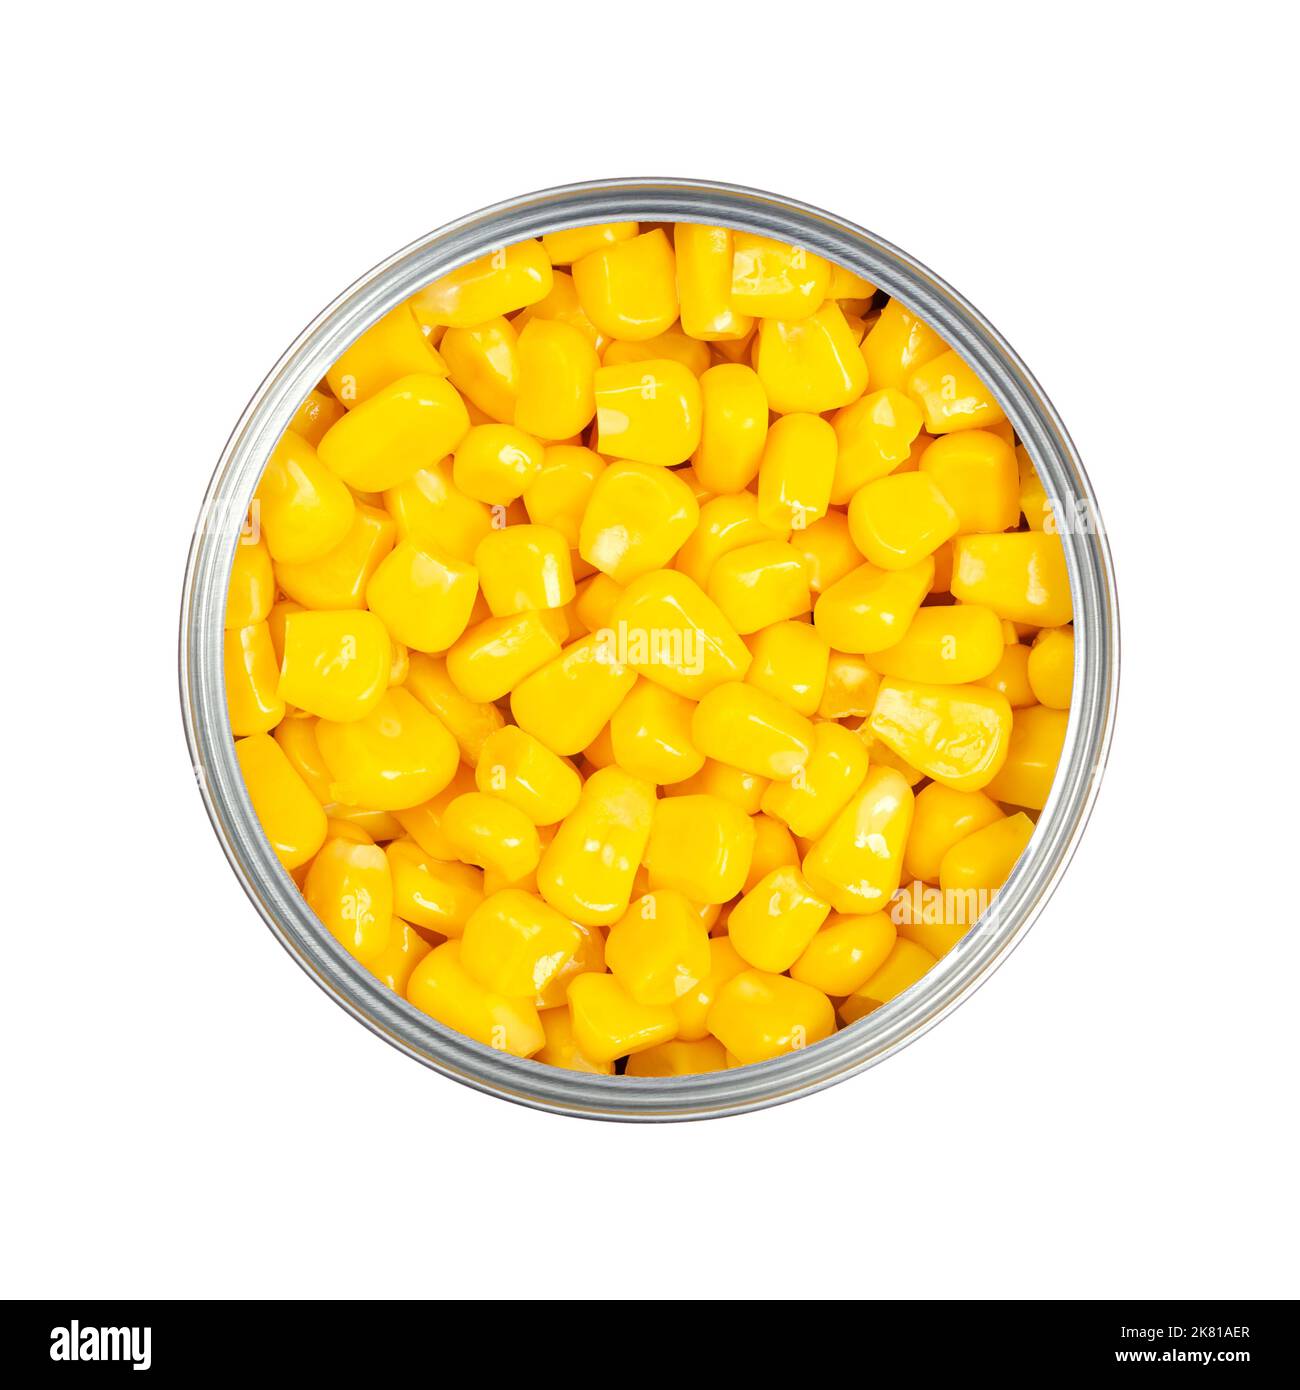 Sweet corn kernels, in an opened can. Cooked canned yellow vegetable maize, Zea mays, also called sugar or pole corn, vegetarian staple food. Stock Photo